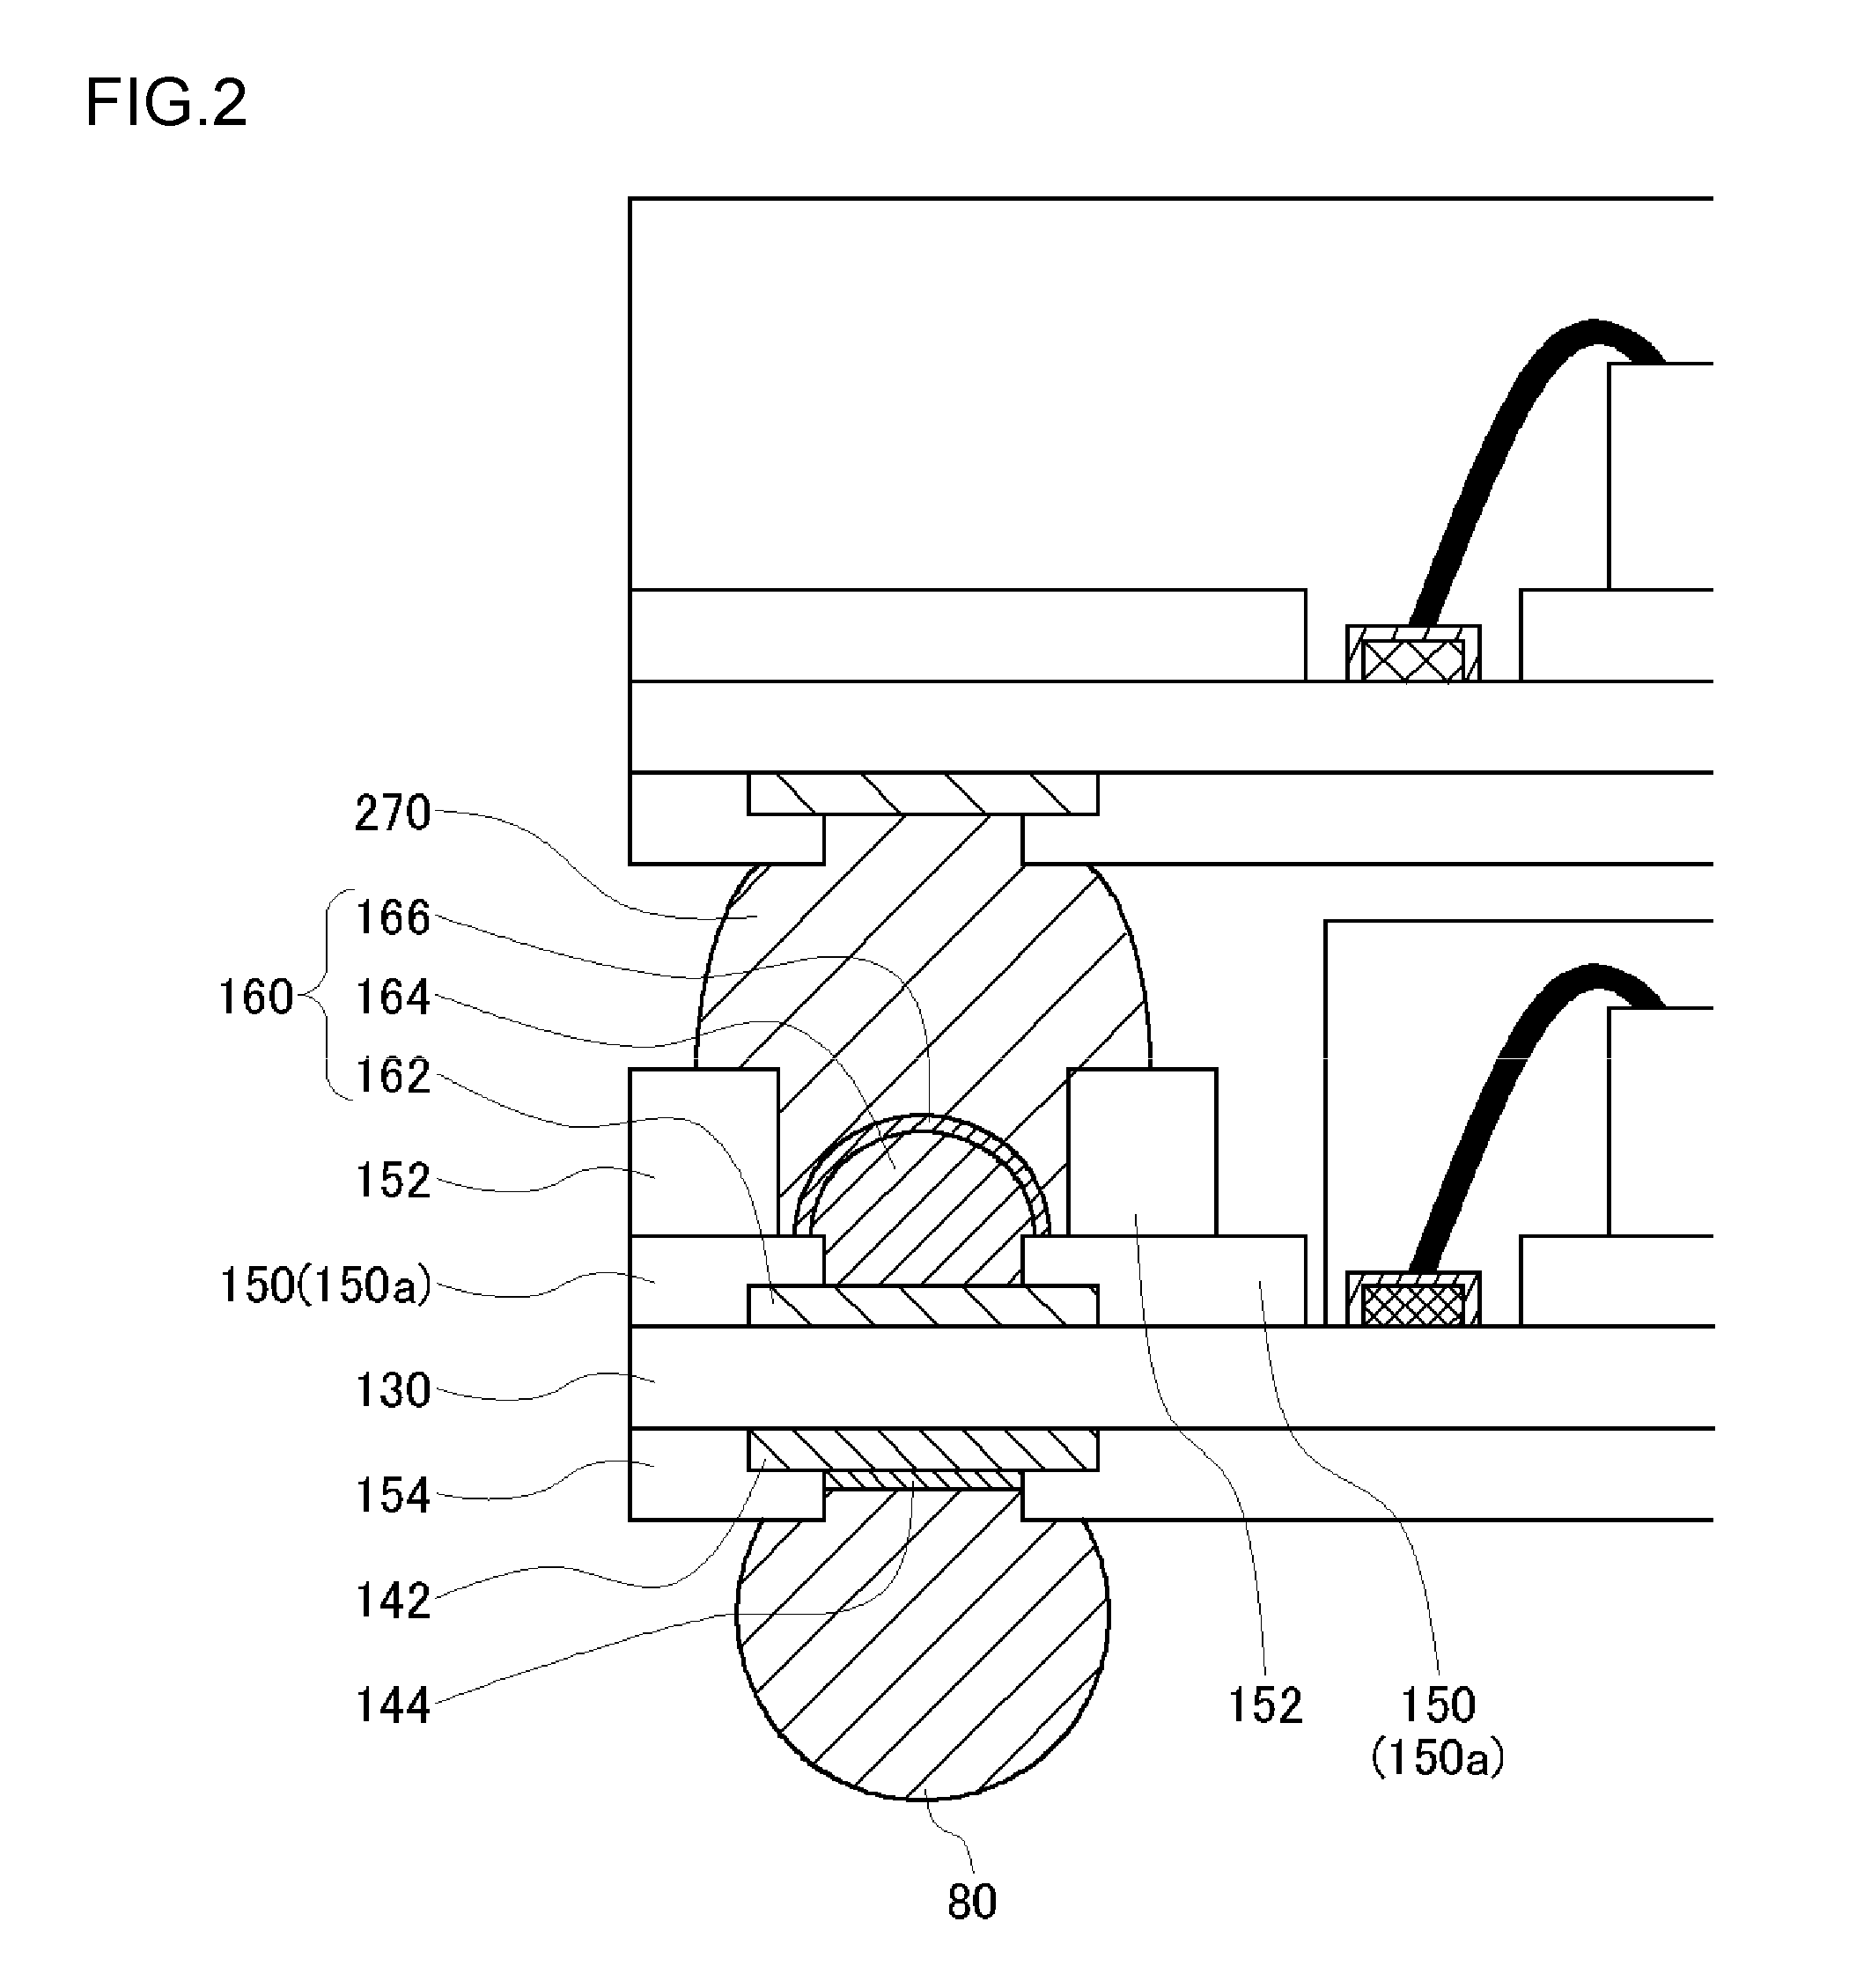 Device mounting board and semiconductor module